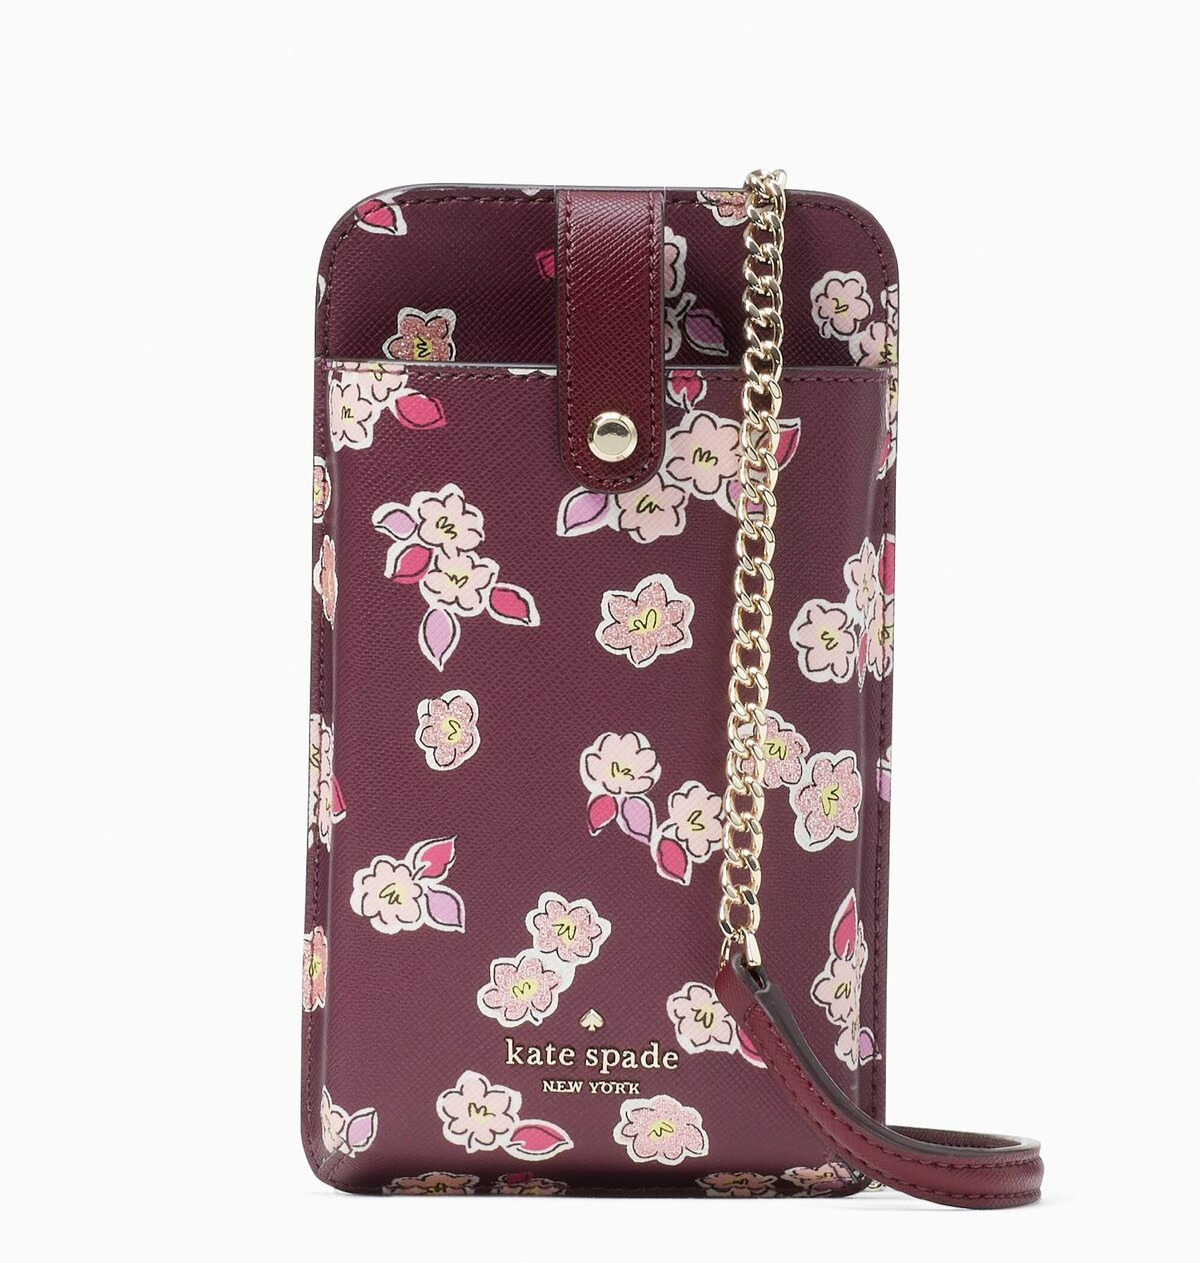 Primary image for Kate Spade Floral Tinsel North South Phone Crossbody ~NWT~ Boxed